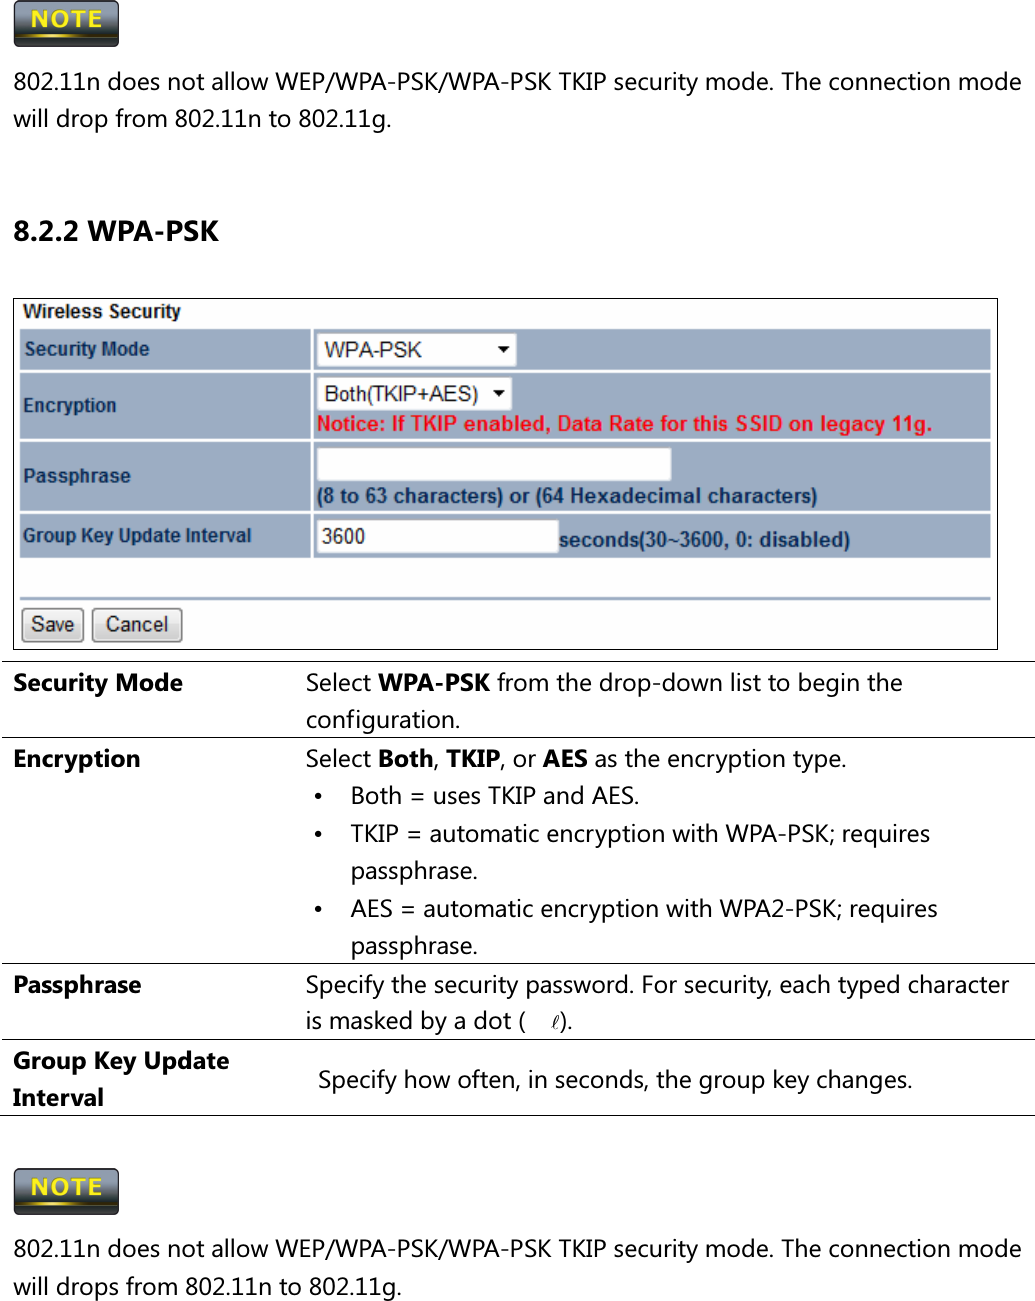  802.11n does not allow WEP/WPA-PSK/WPA-PSK TKIP security mode. The connection mode will drop from 802.11n to 802.11g.  8.2.2 WPA-PSK  Security Mode  Select WPA-PSK from the drop-down list to begin the configuration. Encryption  Select Both, TKIP, or AES as the encryption type. •  Both = uses TKIP and AES. •  TKIP = automatic encryption with WPA-PSK; requires passphrase. •  AES = automatic encryption with WPA2-PSK; requires passphrase. Passphrase  Specify the security password. For security, each typed character is masked by a dot (l). Group Key Update Interval    Specify how often, in seconds, the group key changes.   802.11n does not allow WEP/WPA-PSK/WPA-PSK TKIP security mode. The connection mode will drops from 802.11n to 802.11g.  